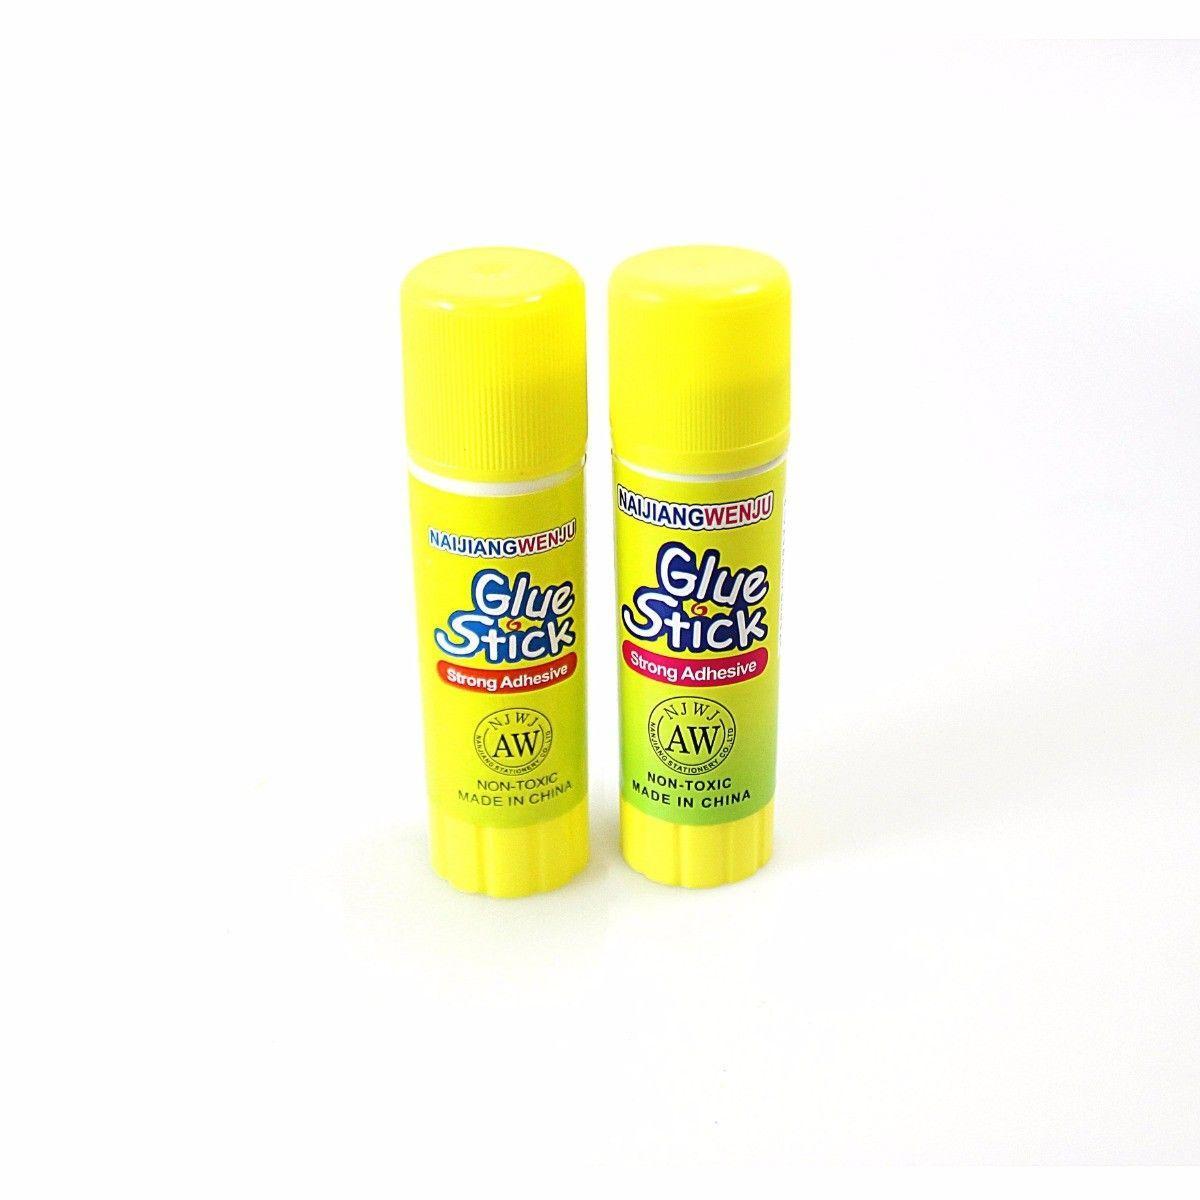 3 Pack Glue Stick x 2 With x 1 White School Glue 2840 (Parcel Rate)